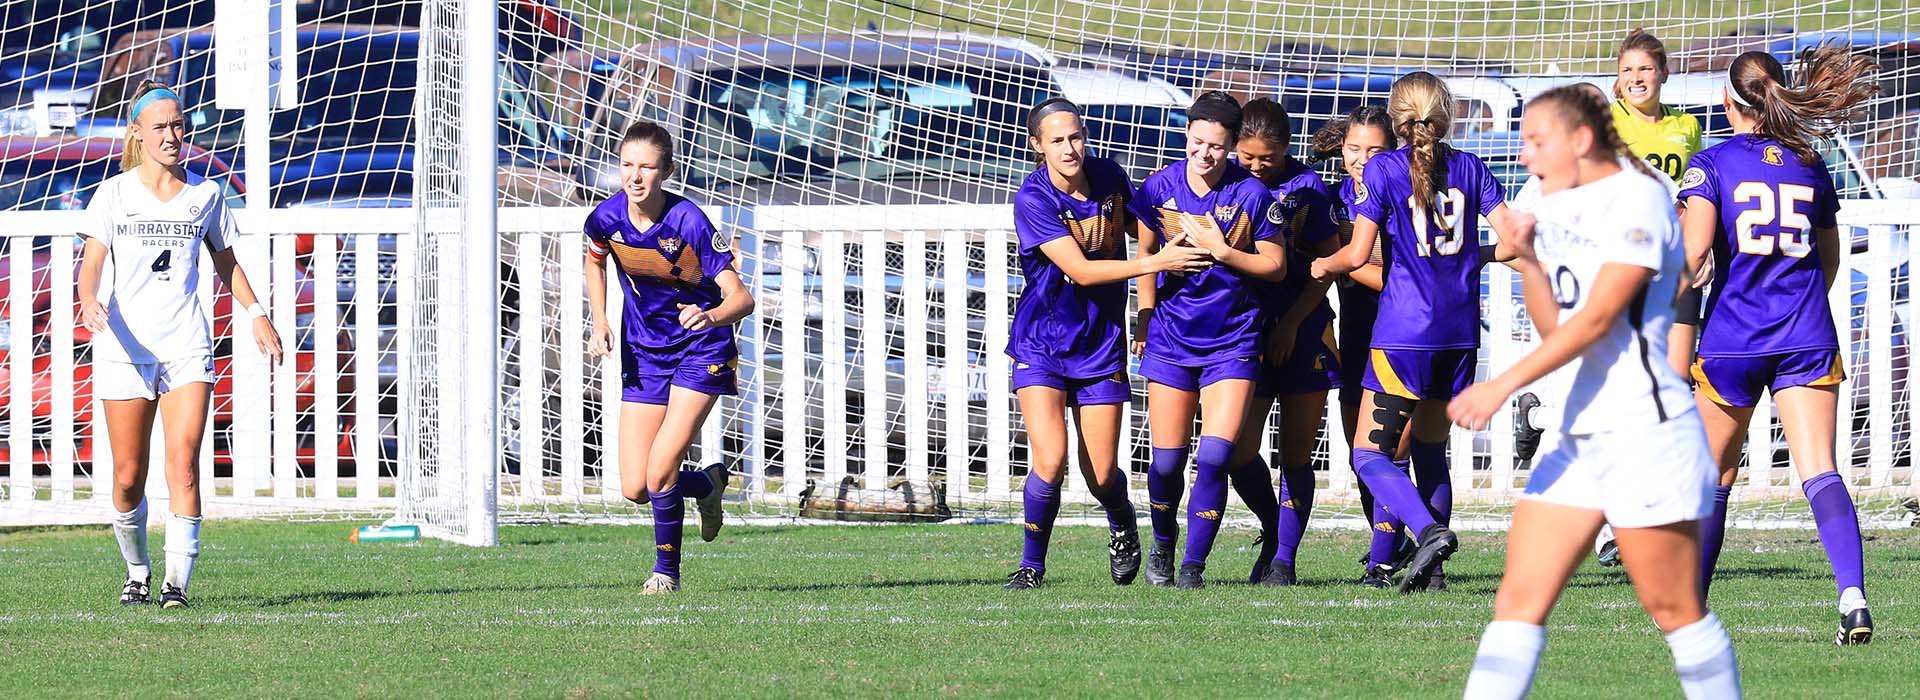 Tech takes down Murray State with a penalty kick goal in the 89th minute to advance to OVC Tournament semifinals